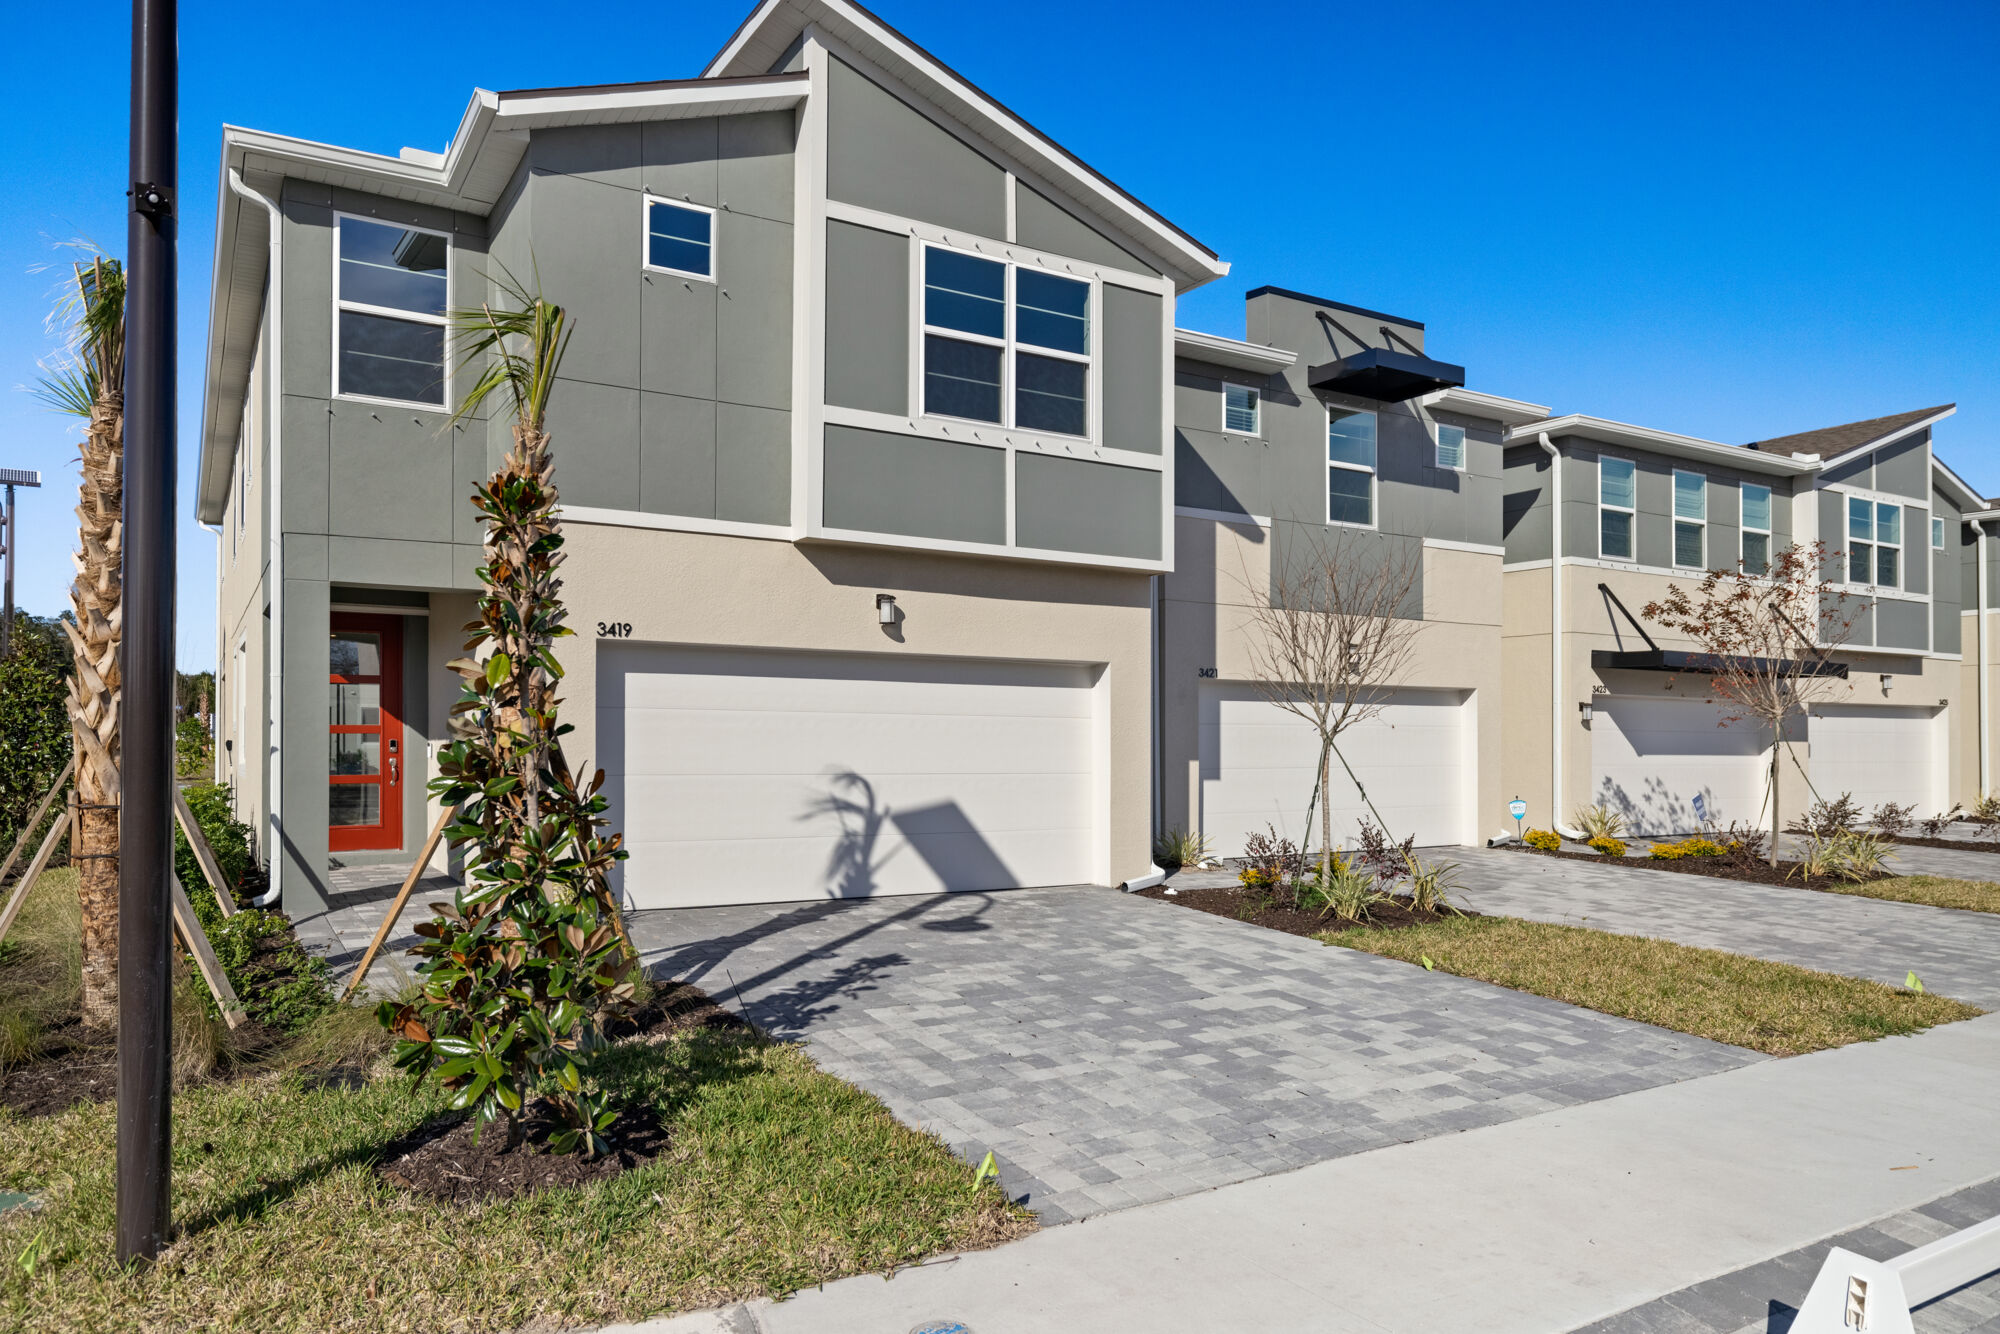 townhome, 4 bedrooms, 3 baths, end unit, one bedroom and full bath on main level, loft/game room combo, owner's bath oasis with soaking tub and separate shower, separate vanities, luxury vinyl plank flooring, open concept floorplan, contemporary exterior